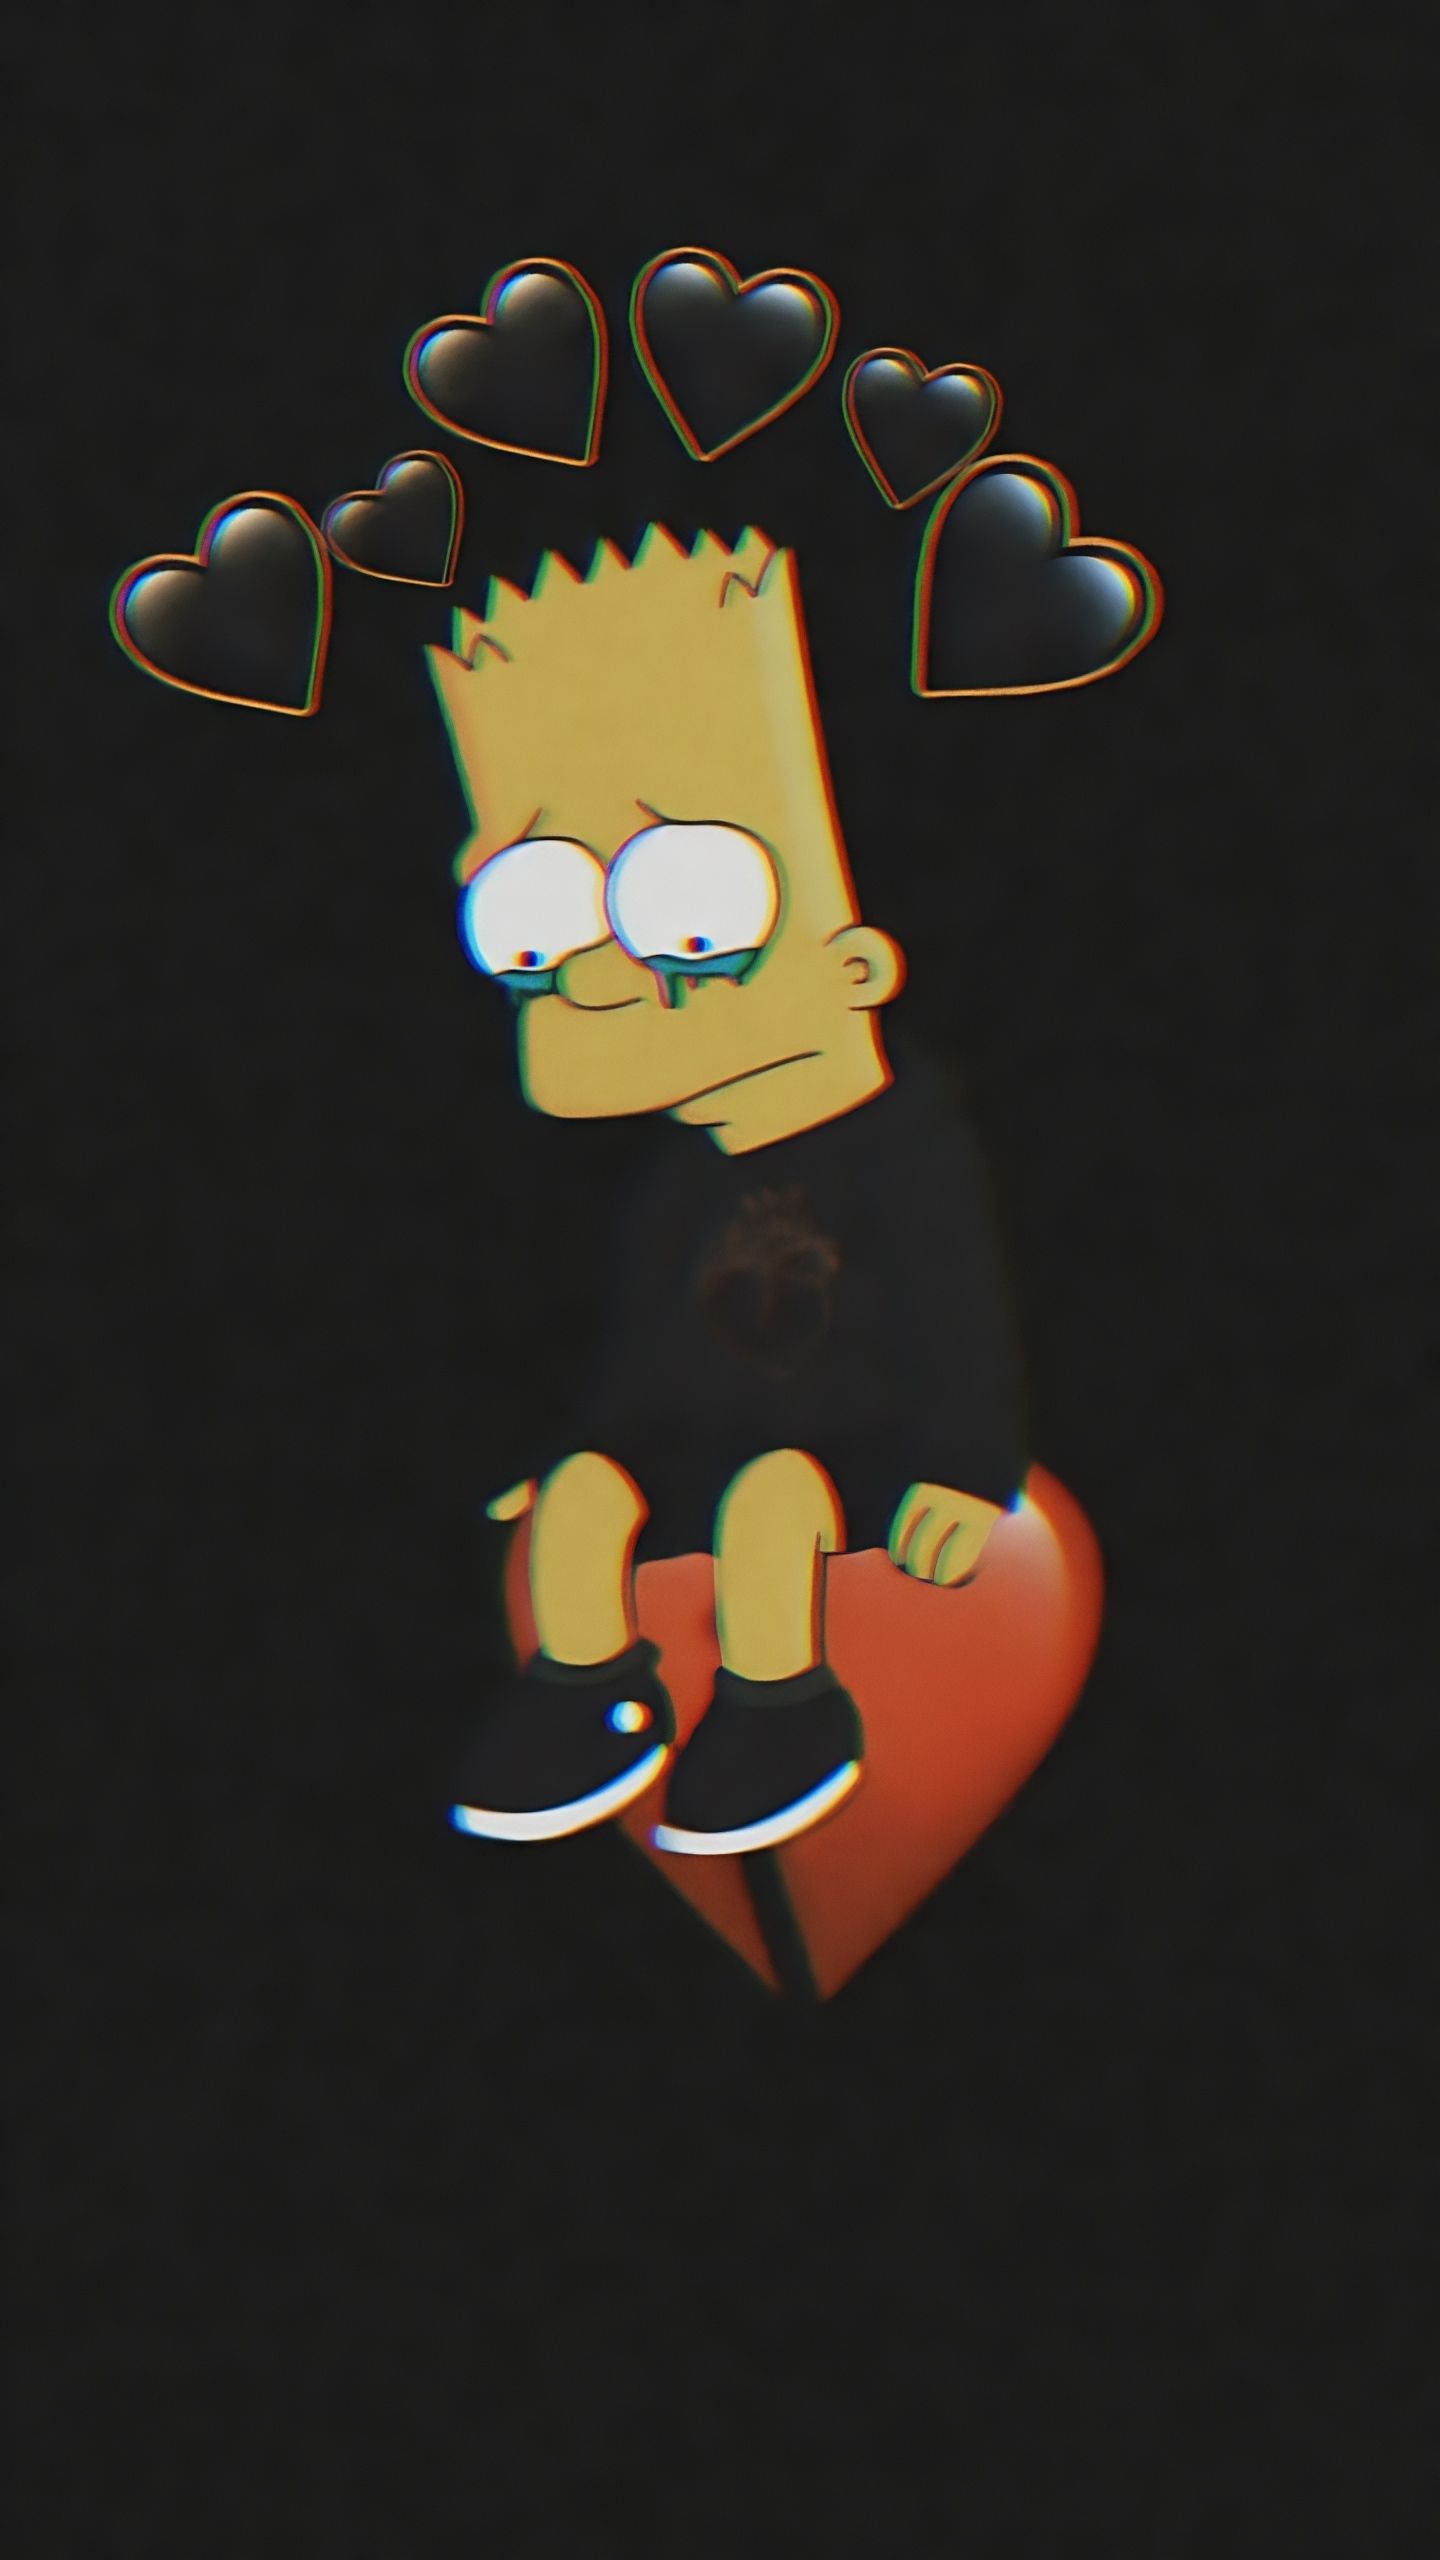 Bart Simpson wallpaper for your phone! - Bart Simpson